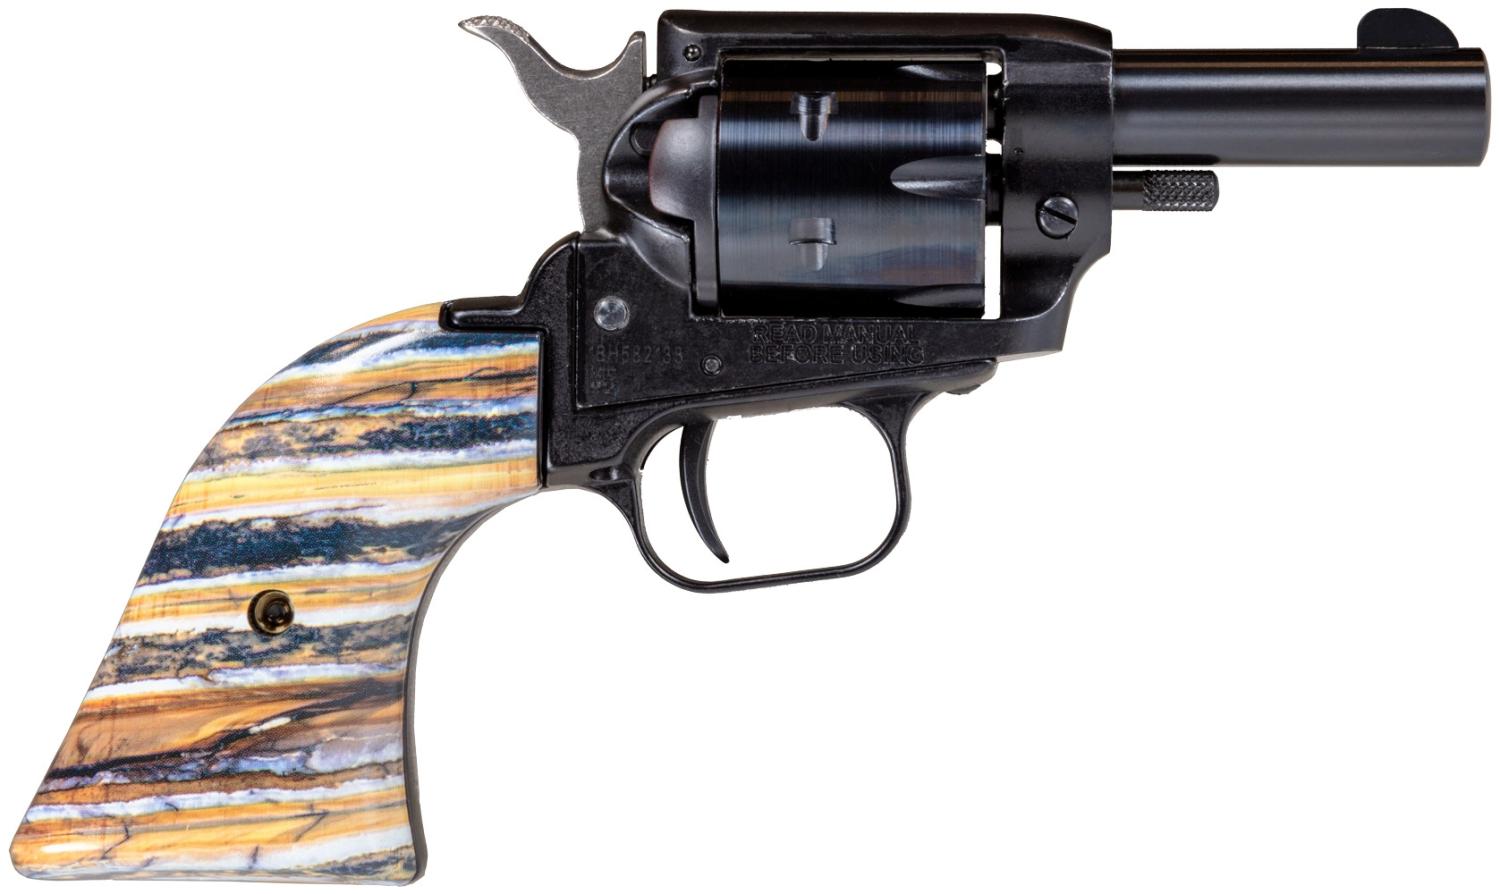 Heritage Barkeep .22 LR Revolver Mammoth Grips 6rd 2" - $159.99 ($12.99 Flat S/H on Firearms)